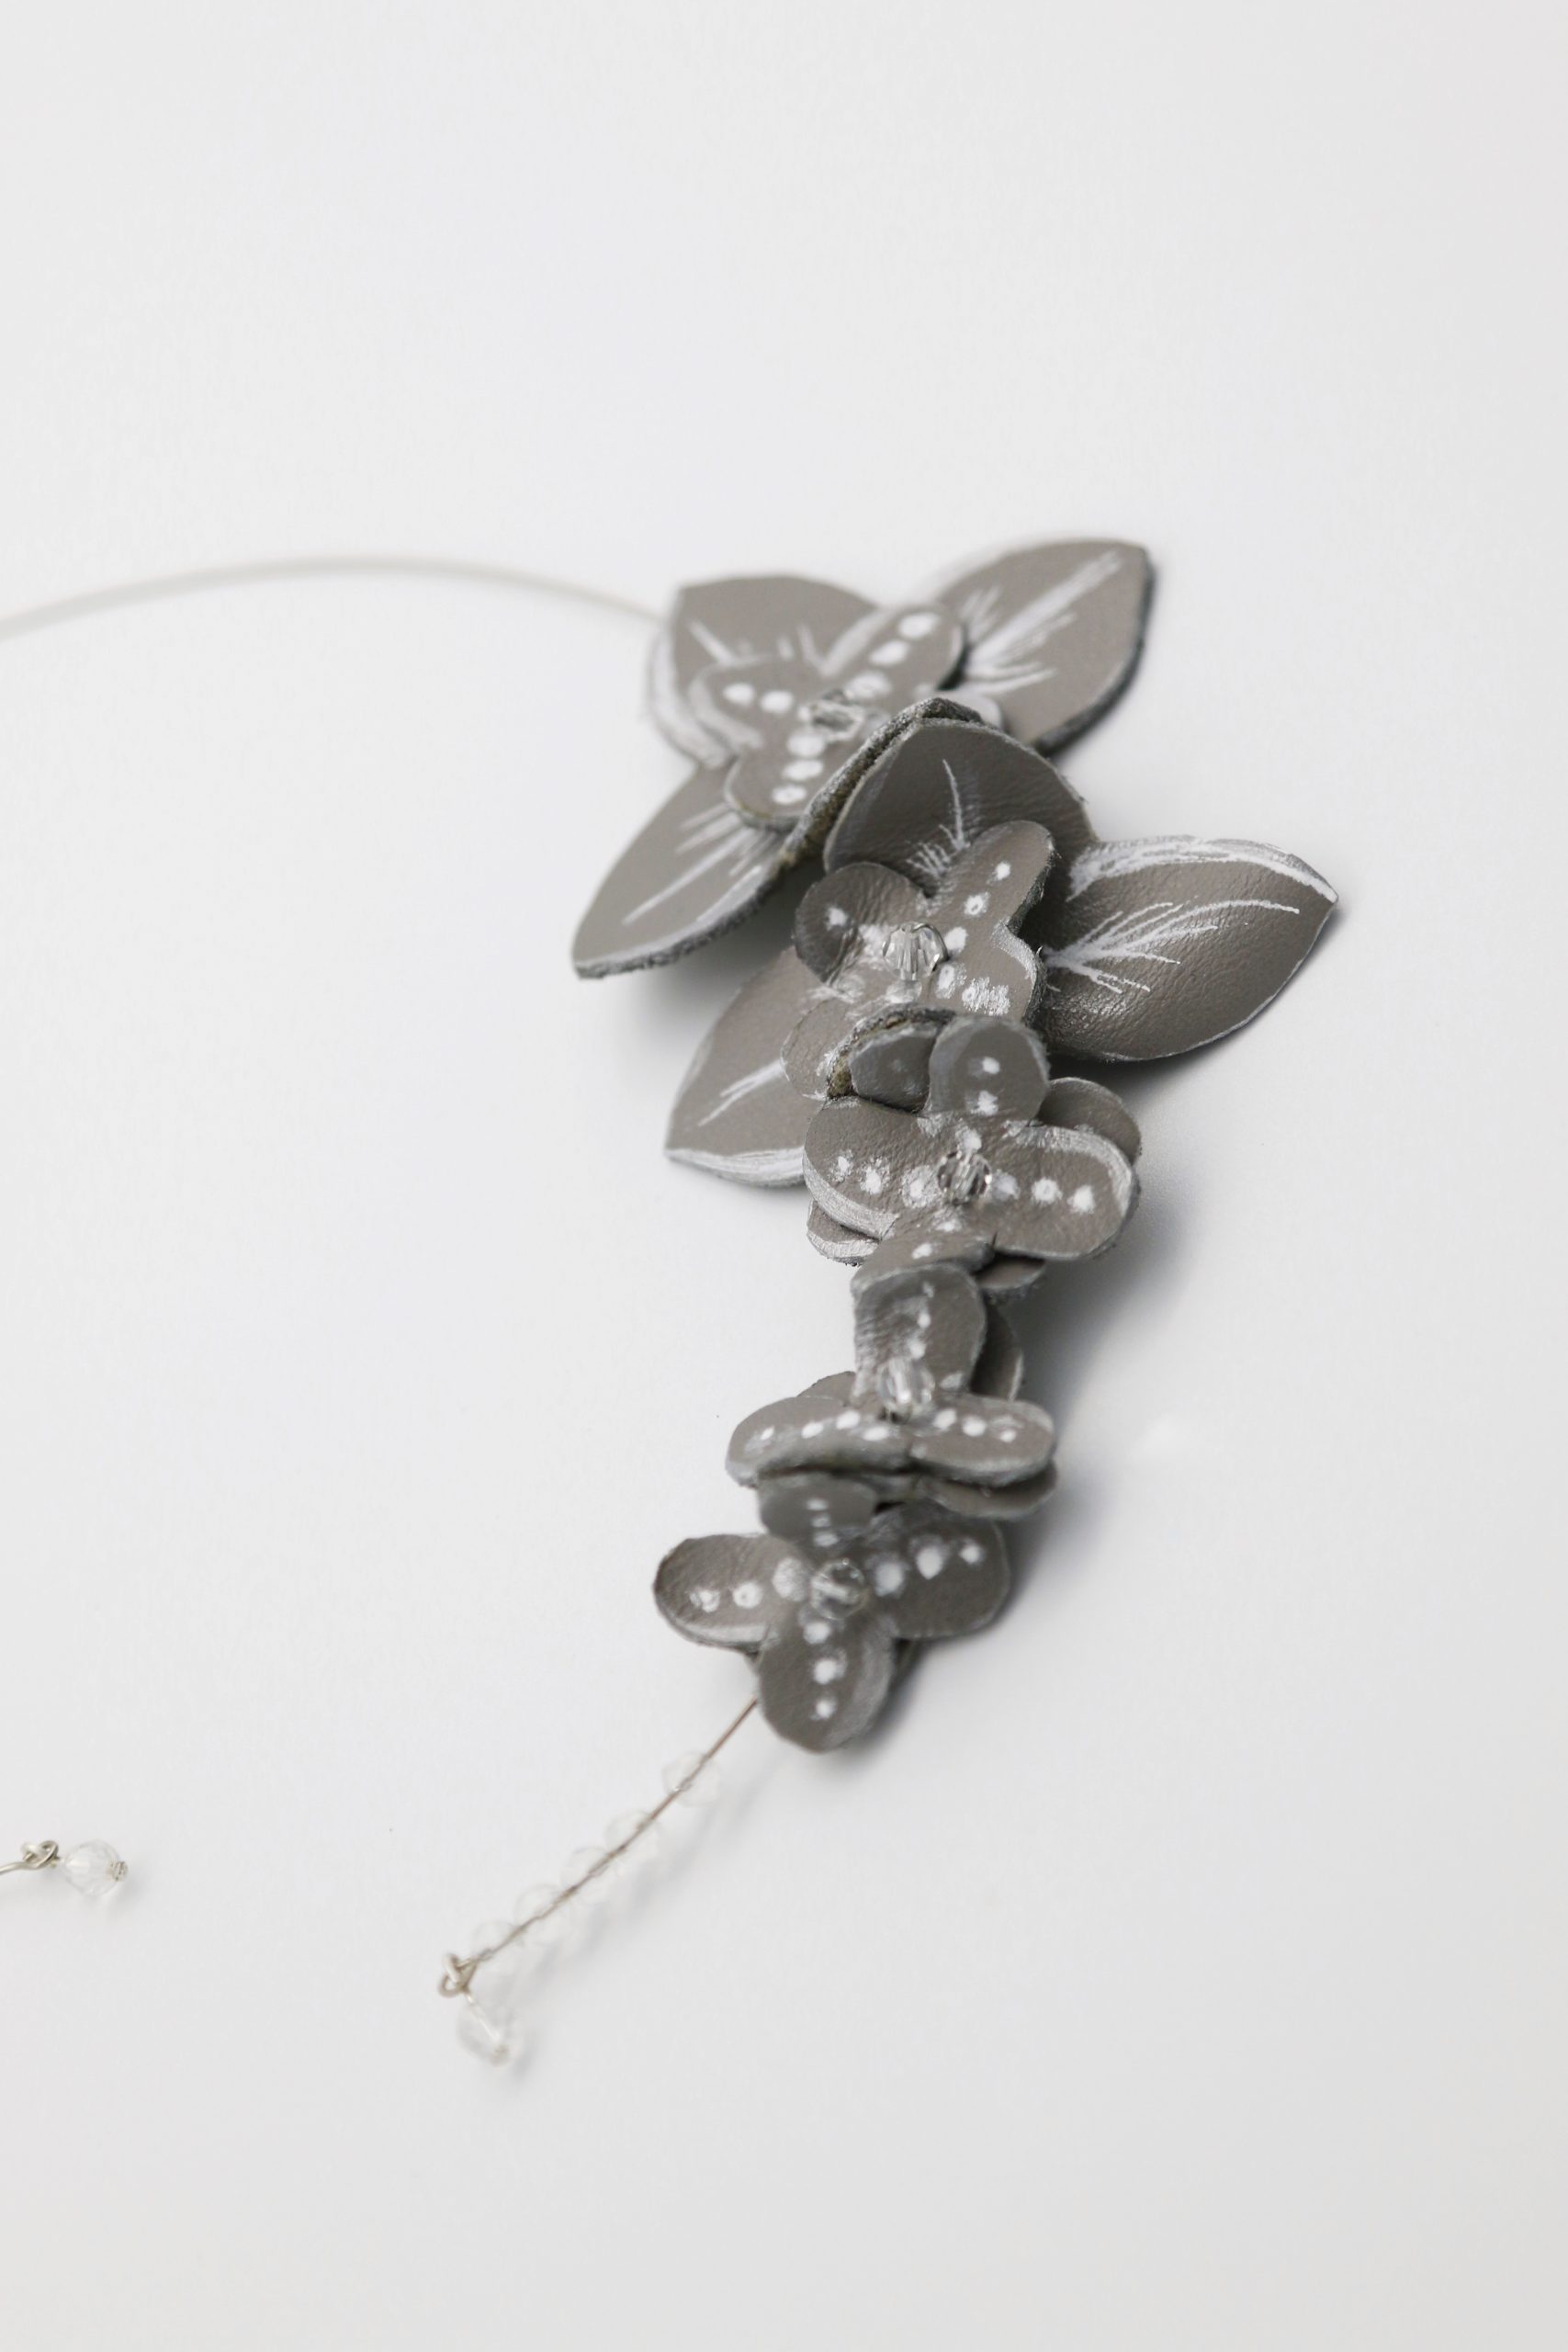 Flowers of ice necklace